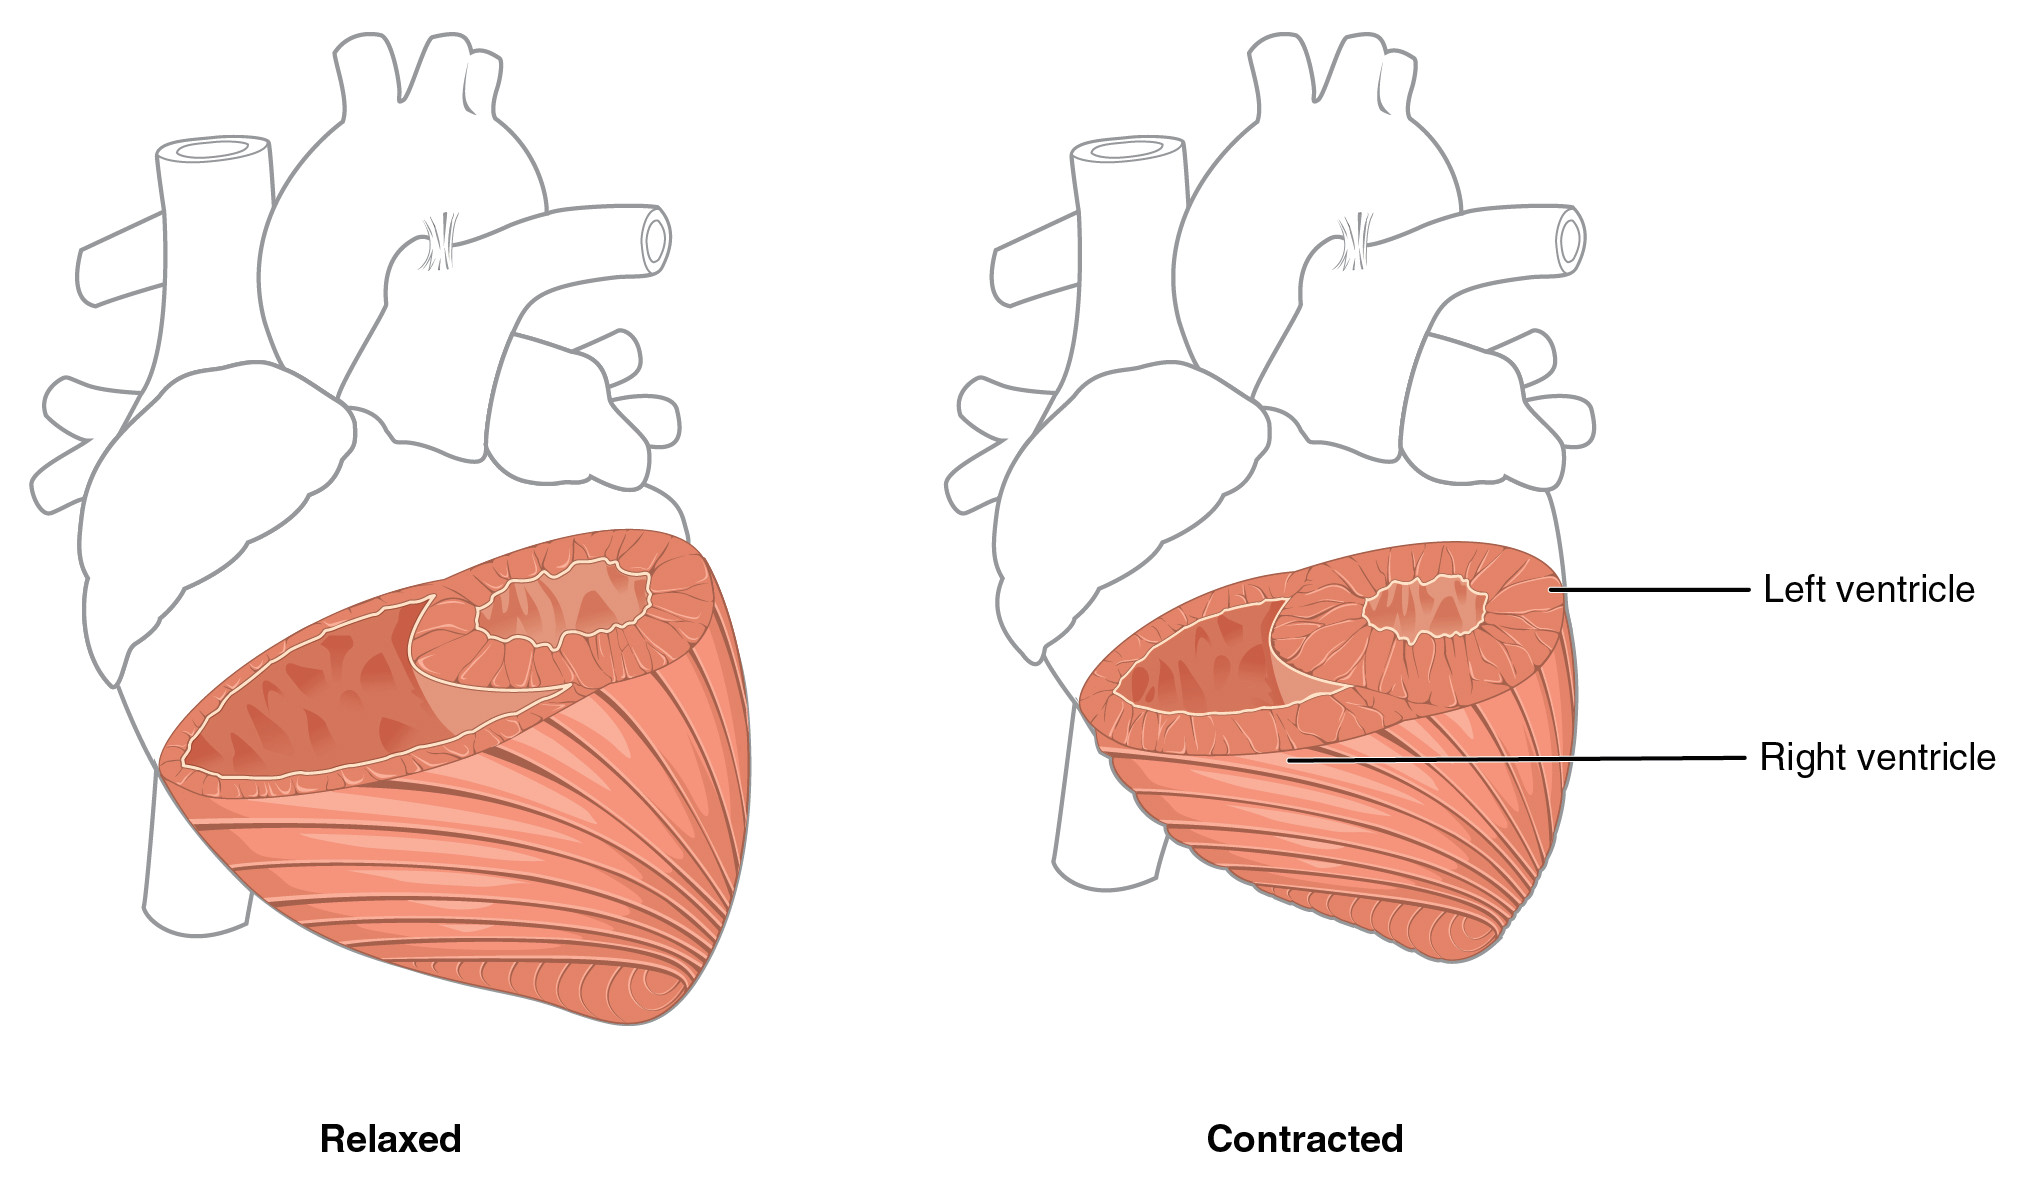 in this figure the left panel shows the muscles of the heart in the relaxed position